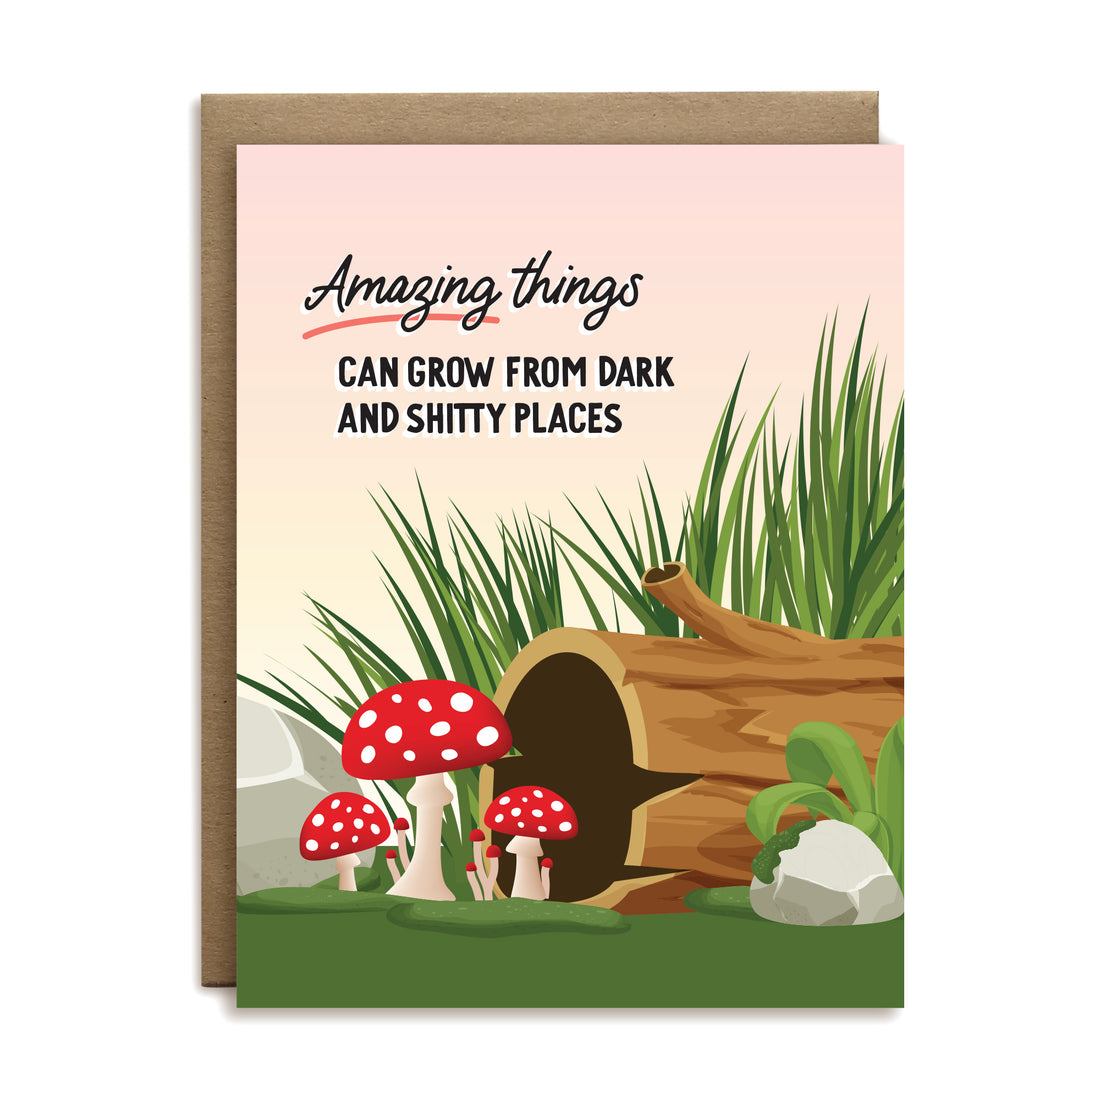 Amazing things can grow from dark and shitty places greeting card by I&